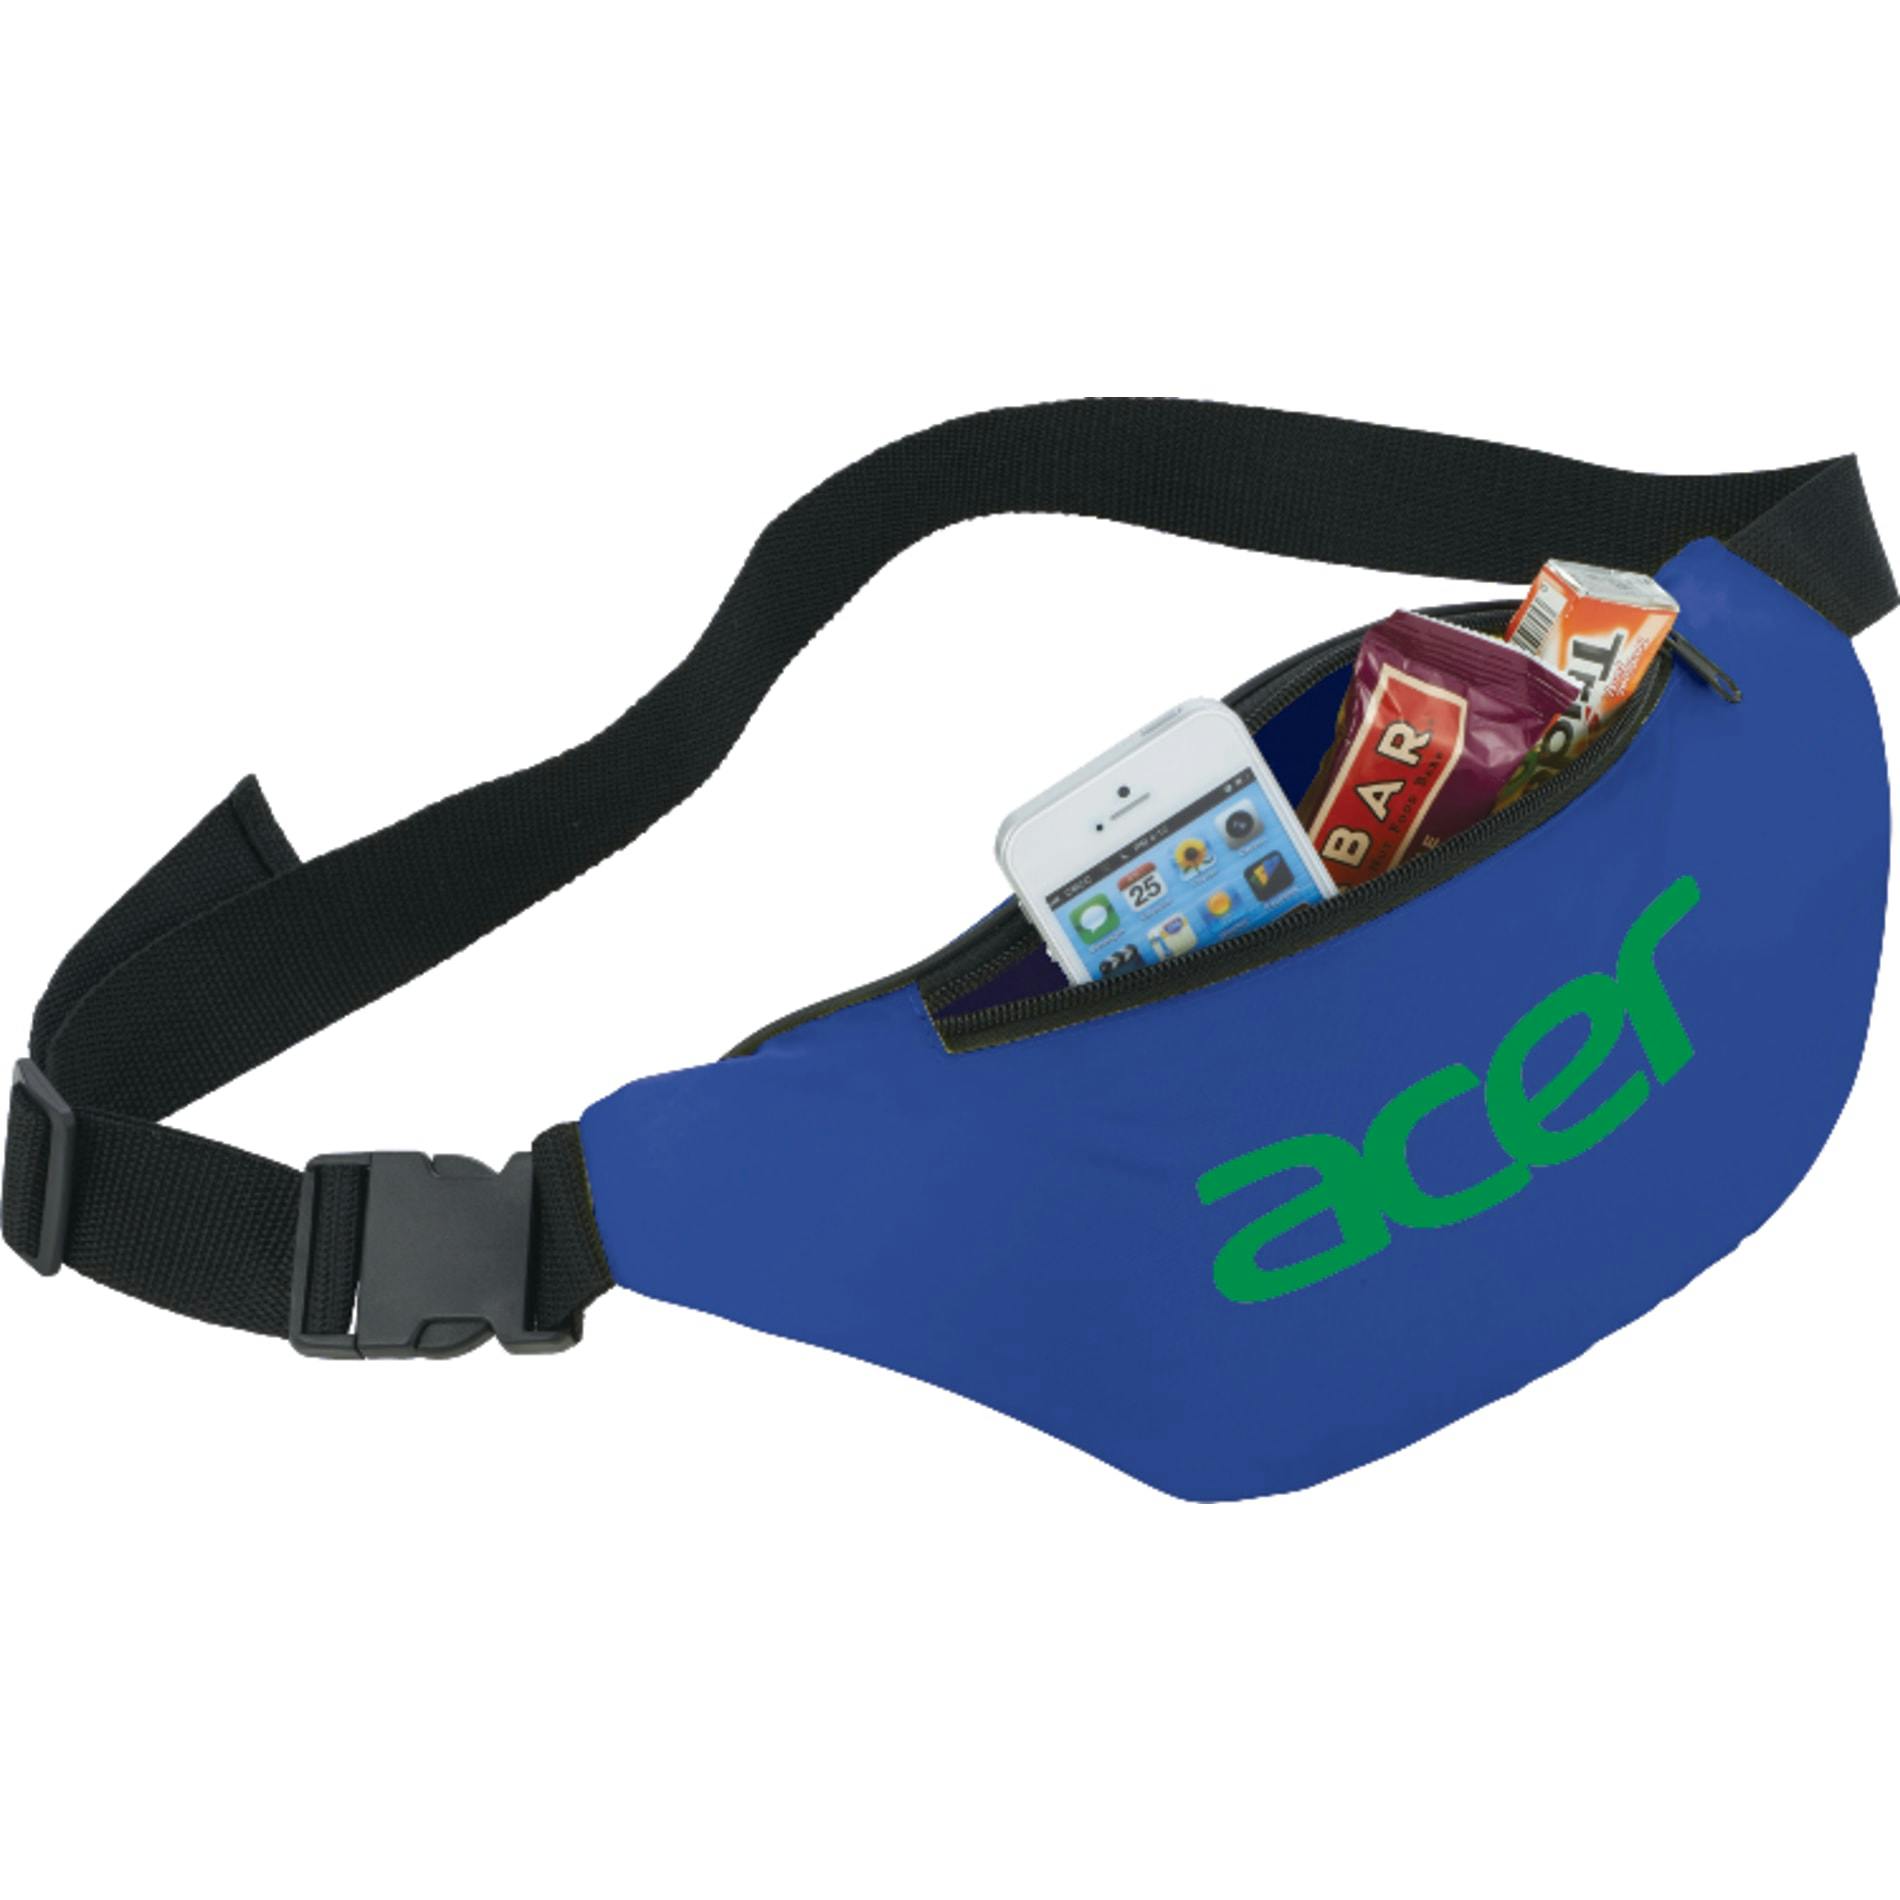 Hipster Budget Fanny Pack - additional Image 5